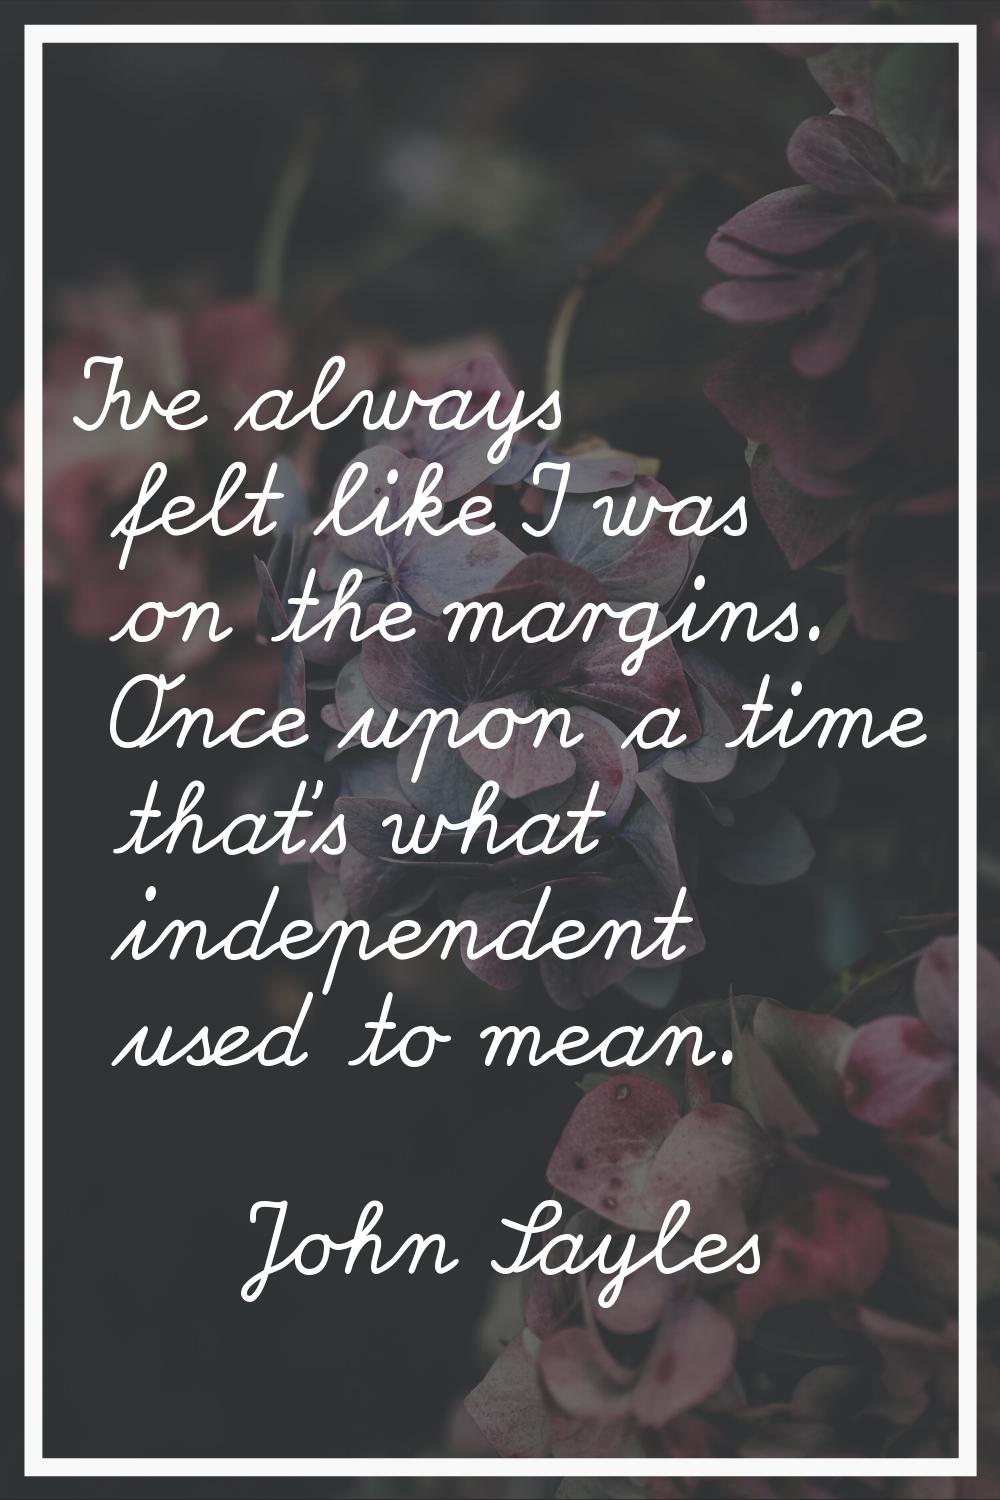 I've always felt like I was on the margins. Once upon a time that's what independent used to mean.